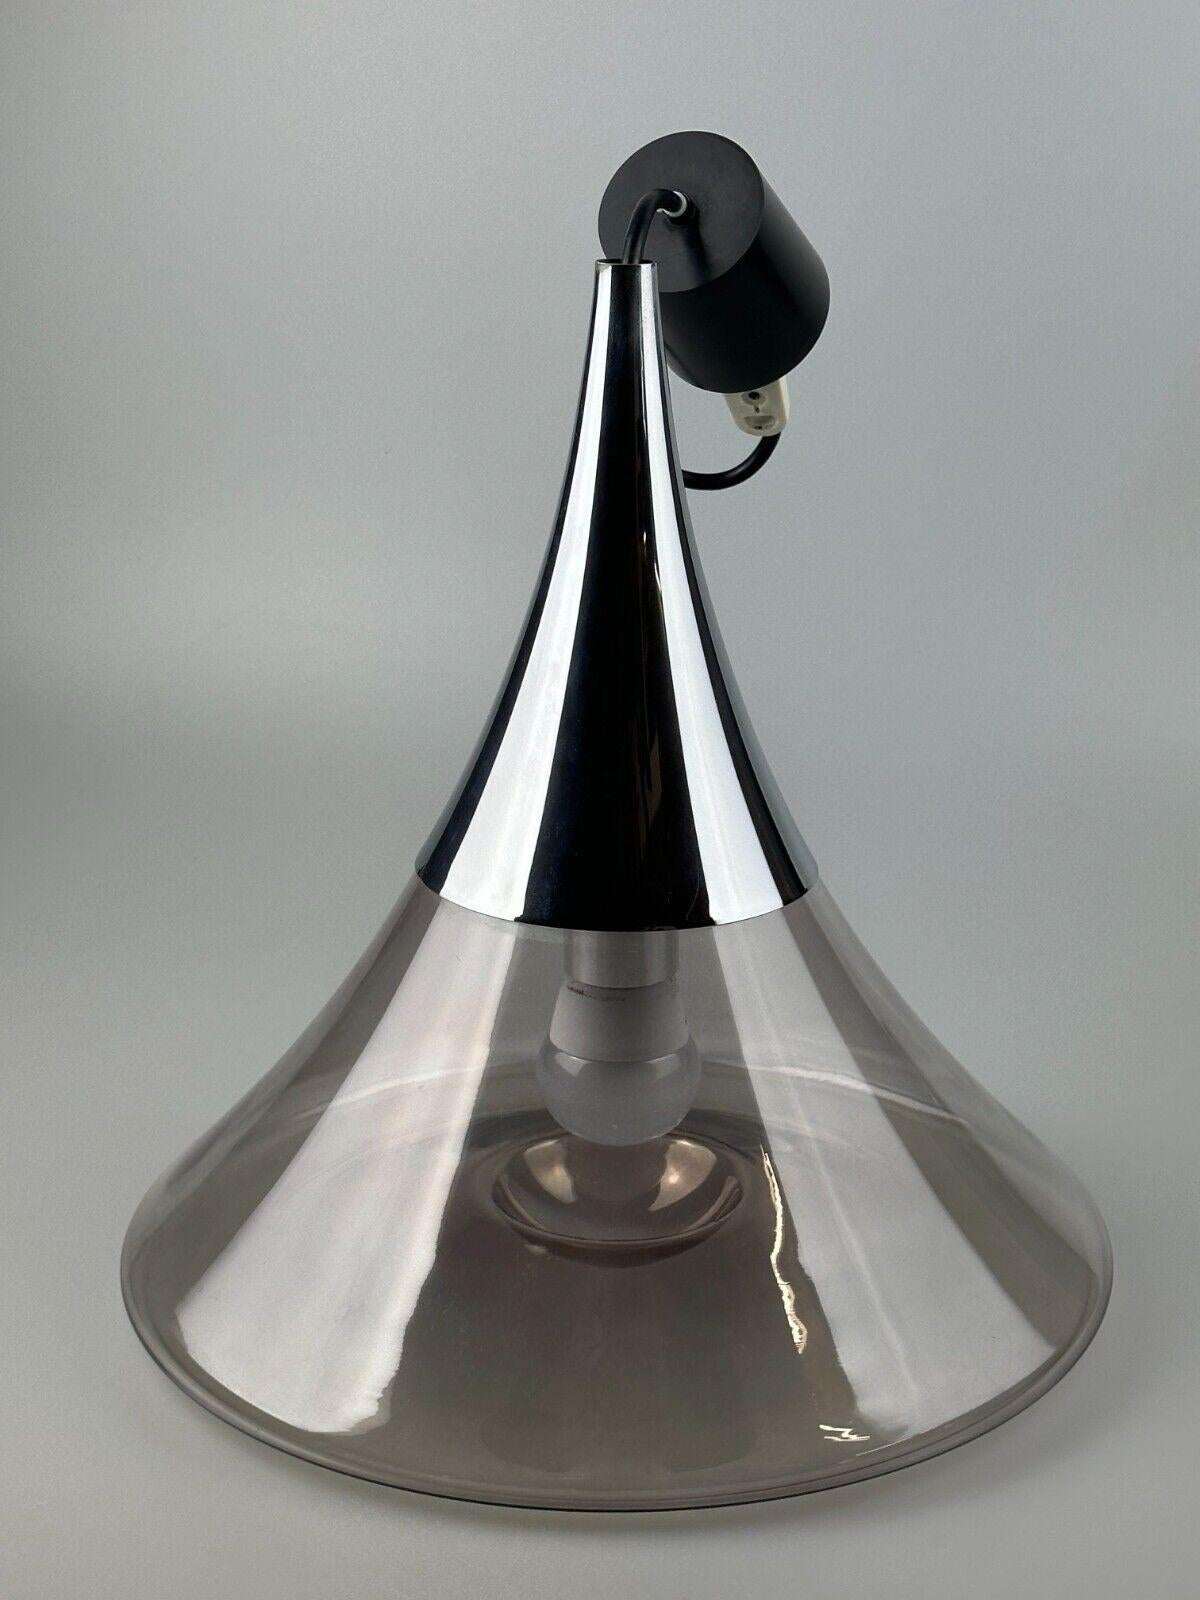 60s 70s lamp light ceiling lamp Limburg Germany glass space age design For Sale 5